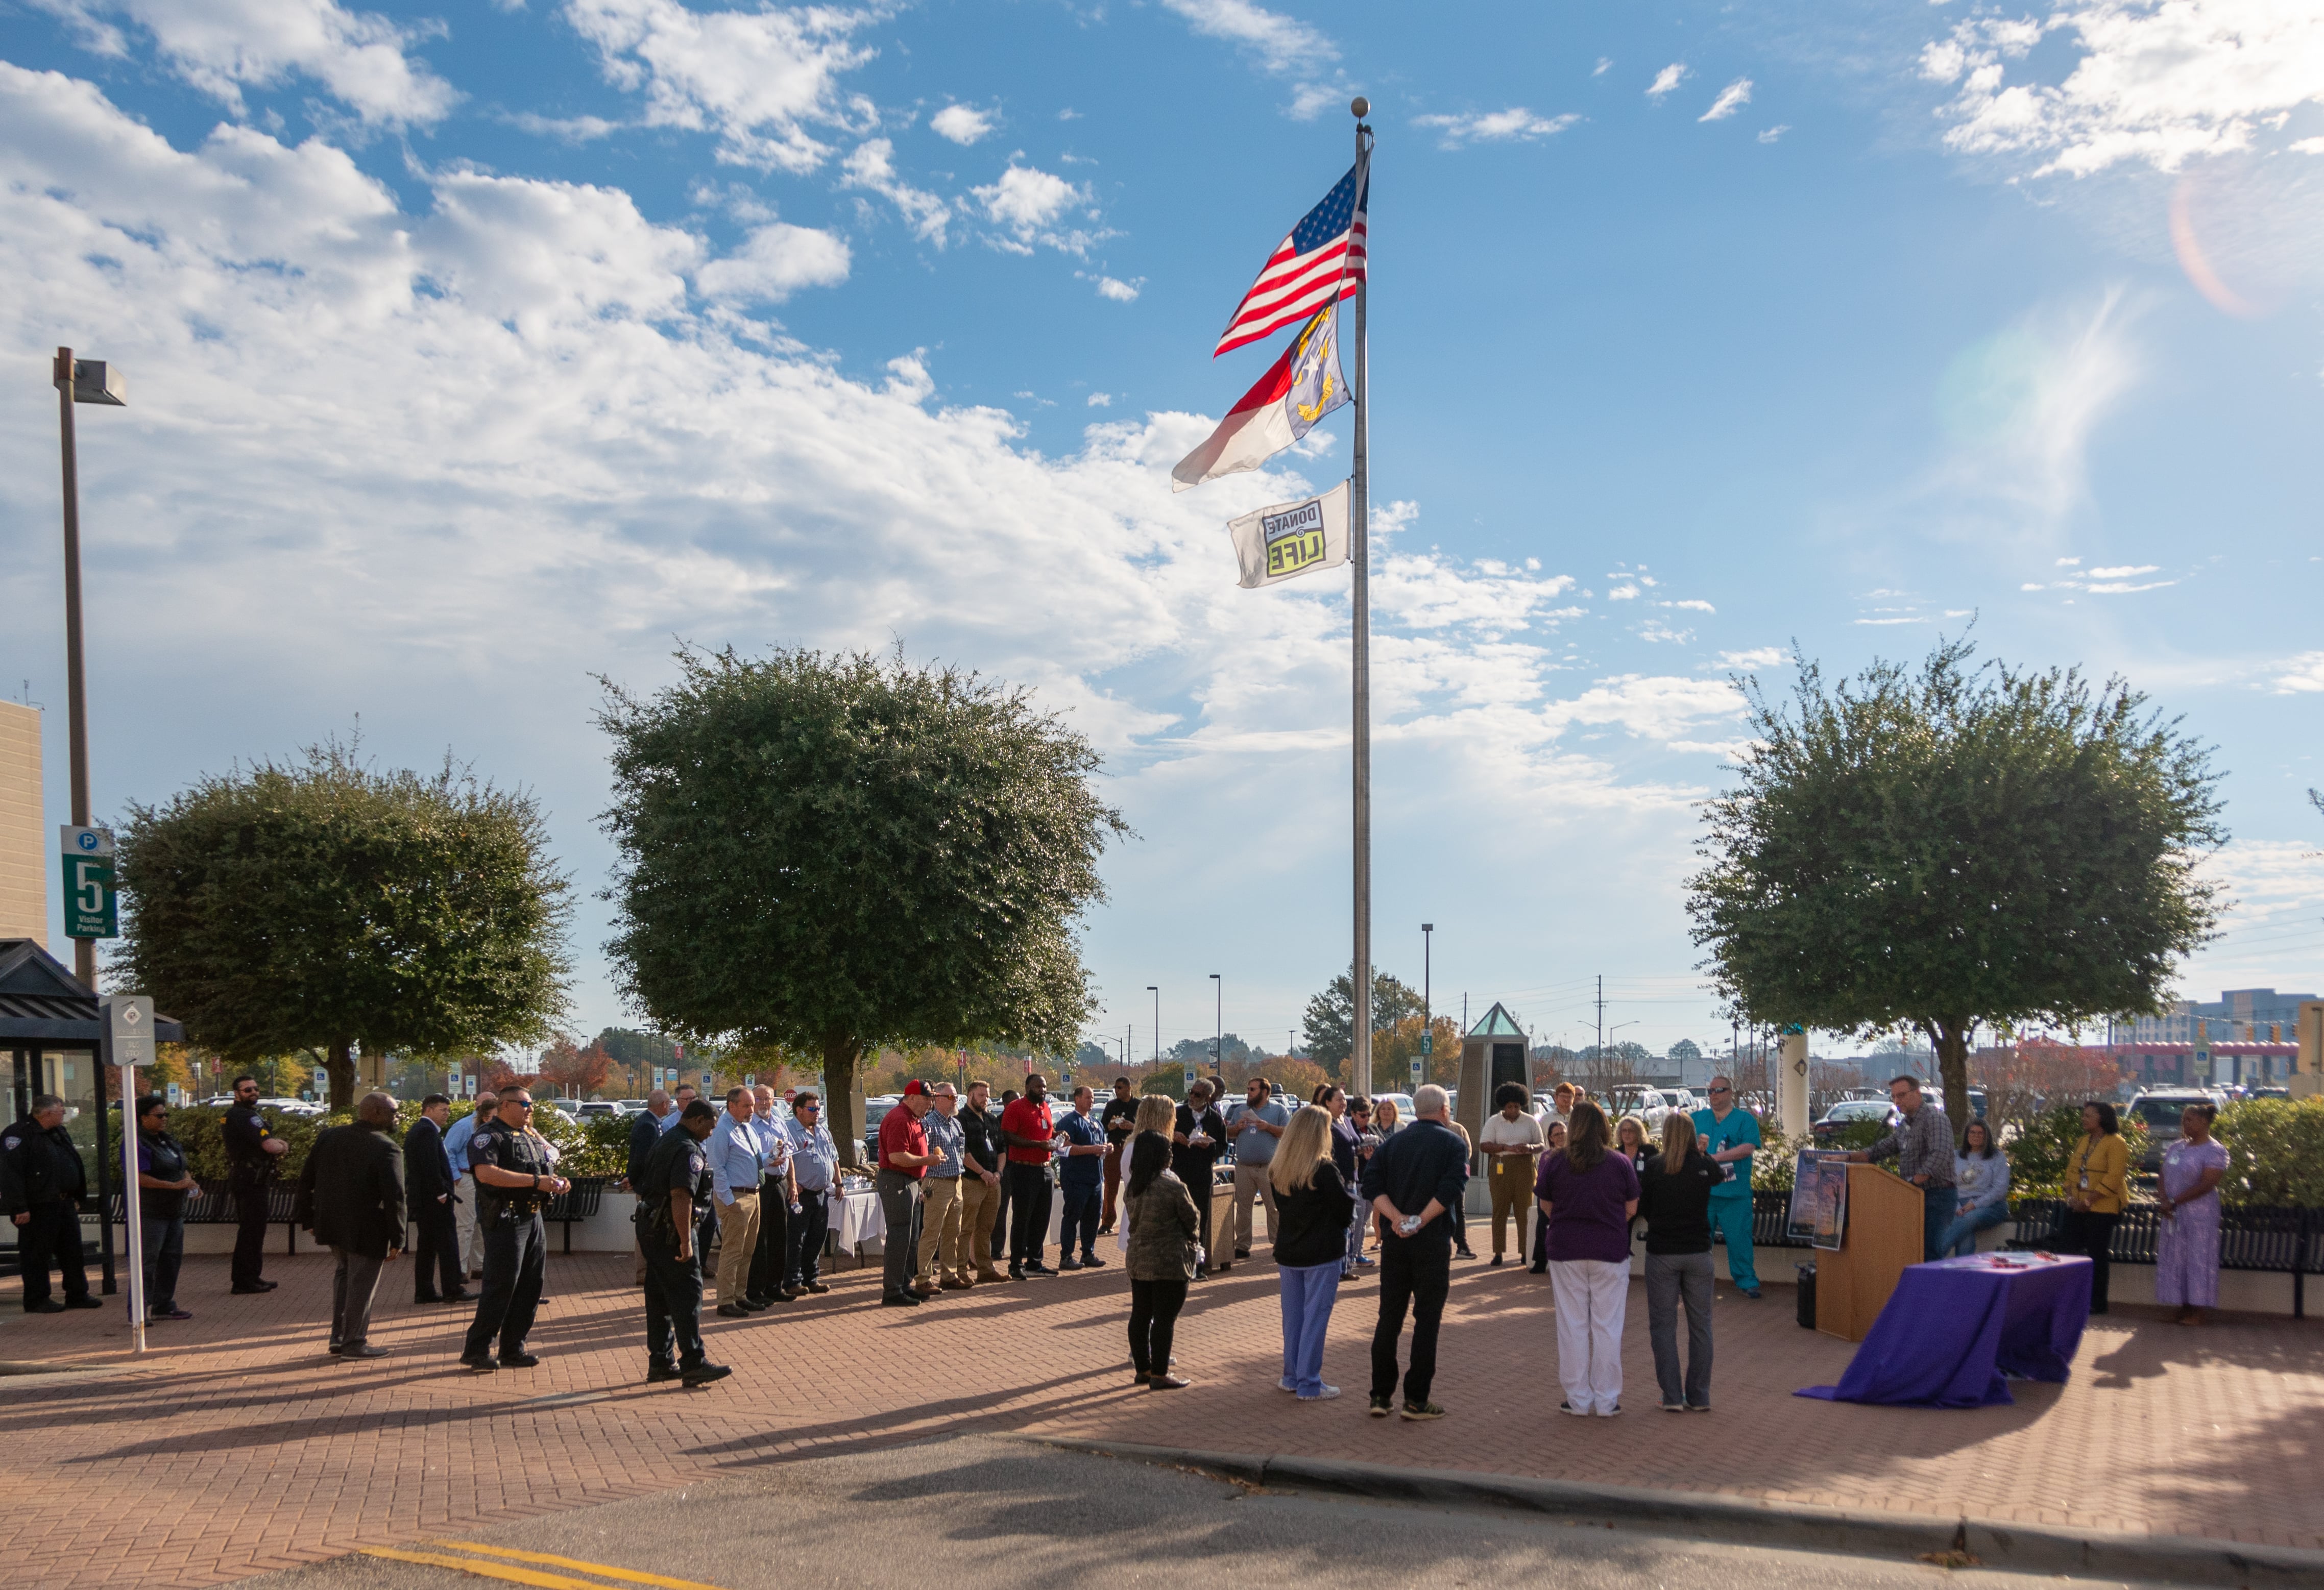 ECU Health team members gather around the flag pole in front of ECU Health Medical Center for a Veterans Day recognition event.